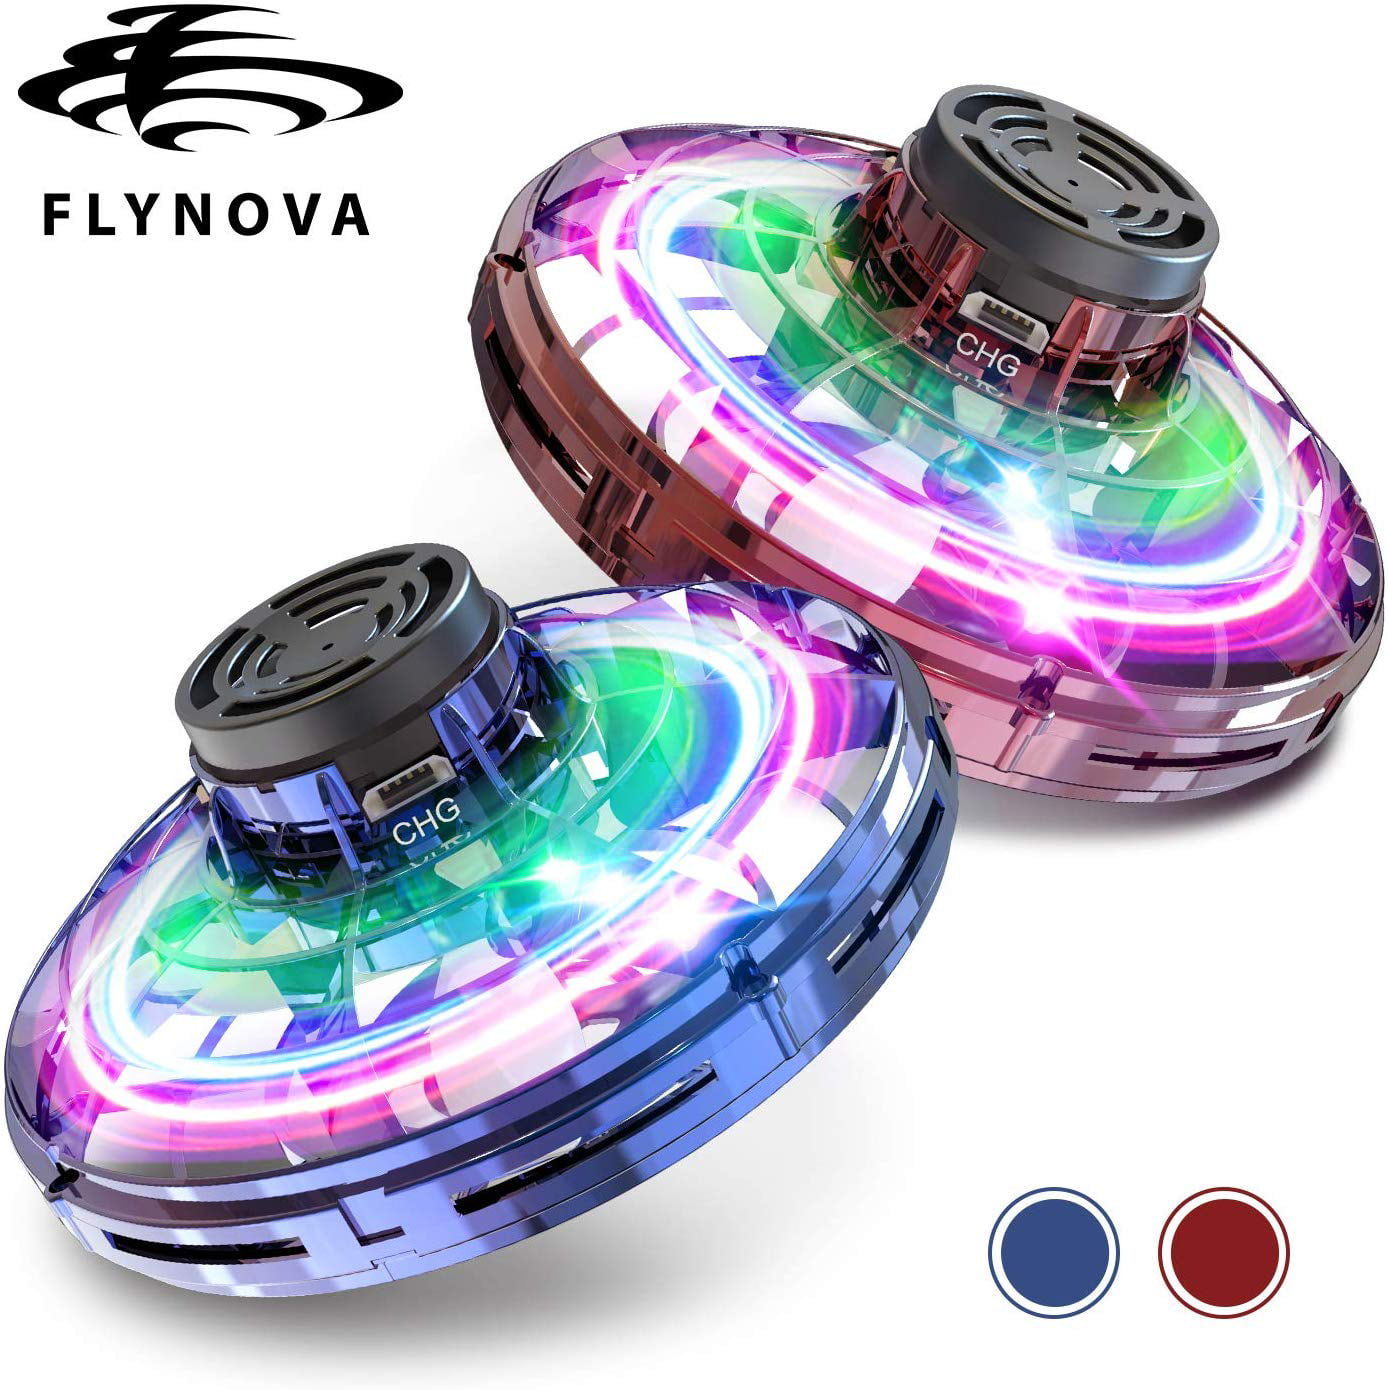 Flynova Acrobatic Spinning Flying UFO Mini Drone Toy for Kids with RGB lights 